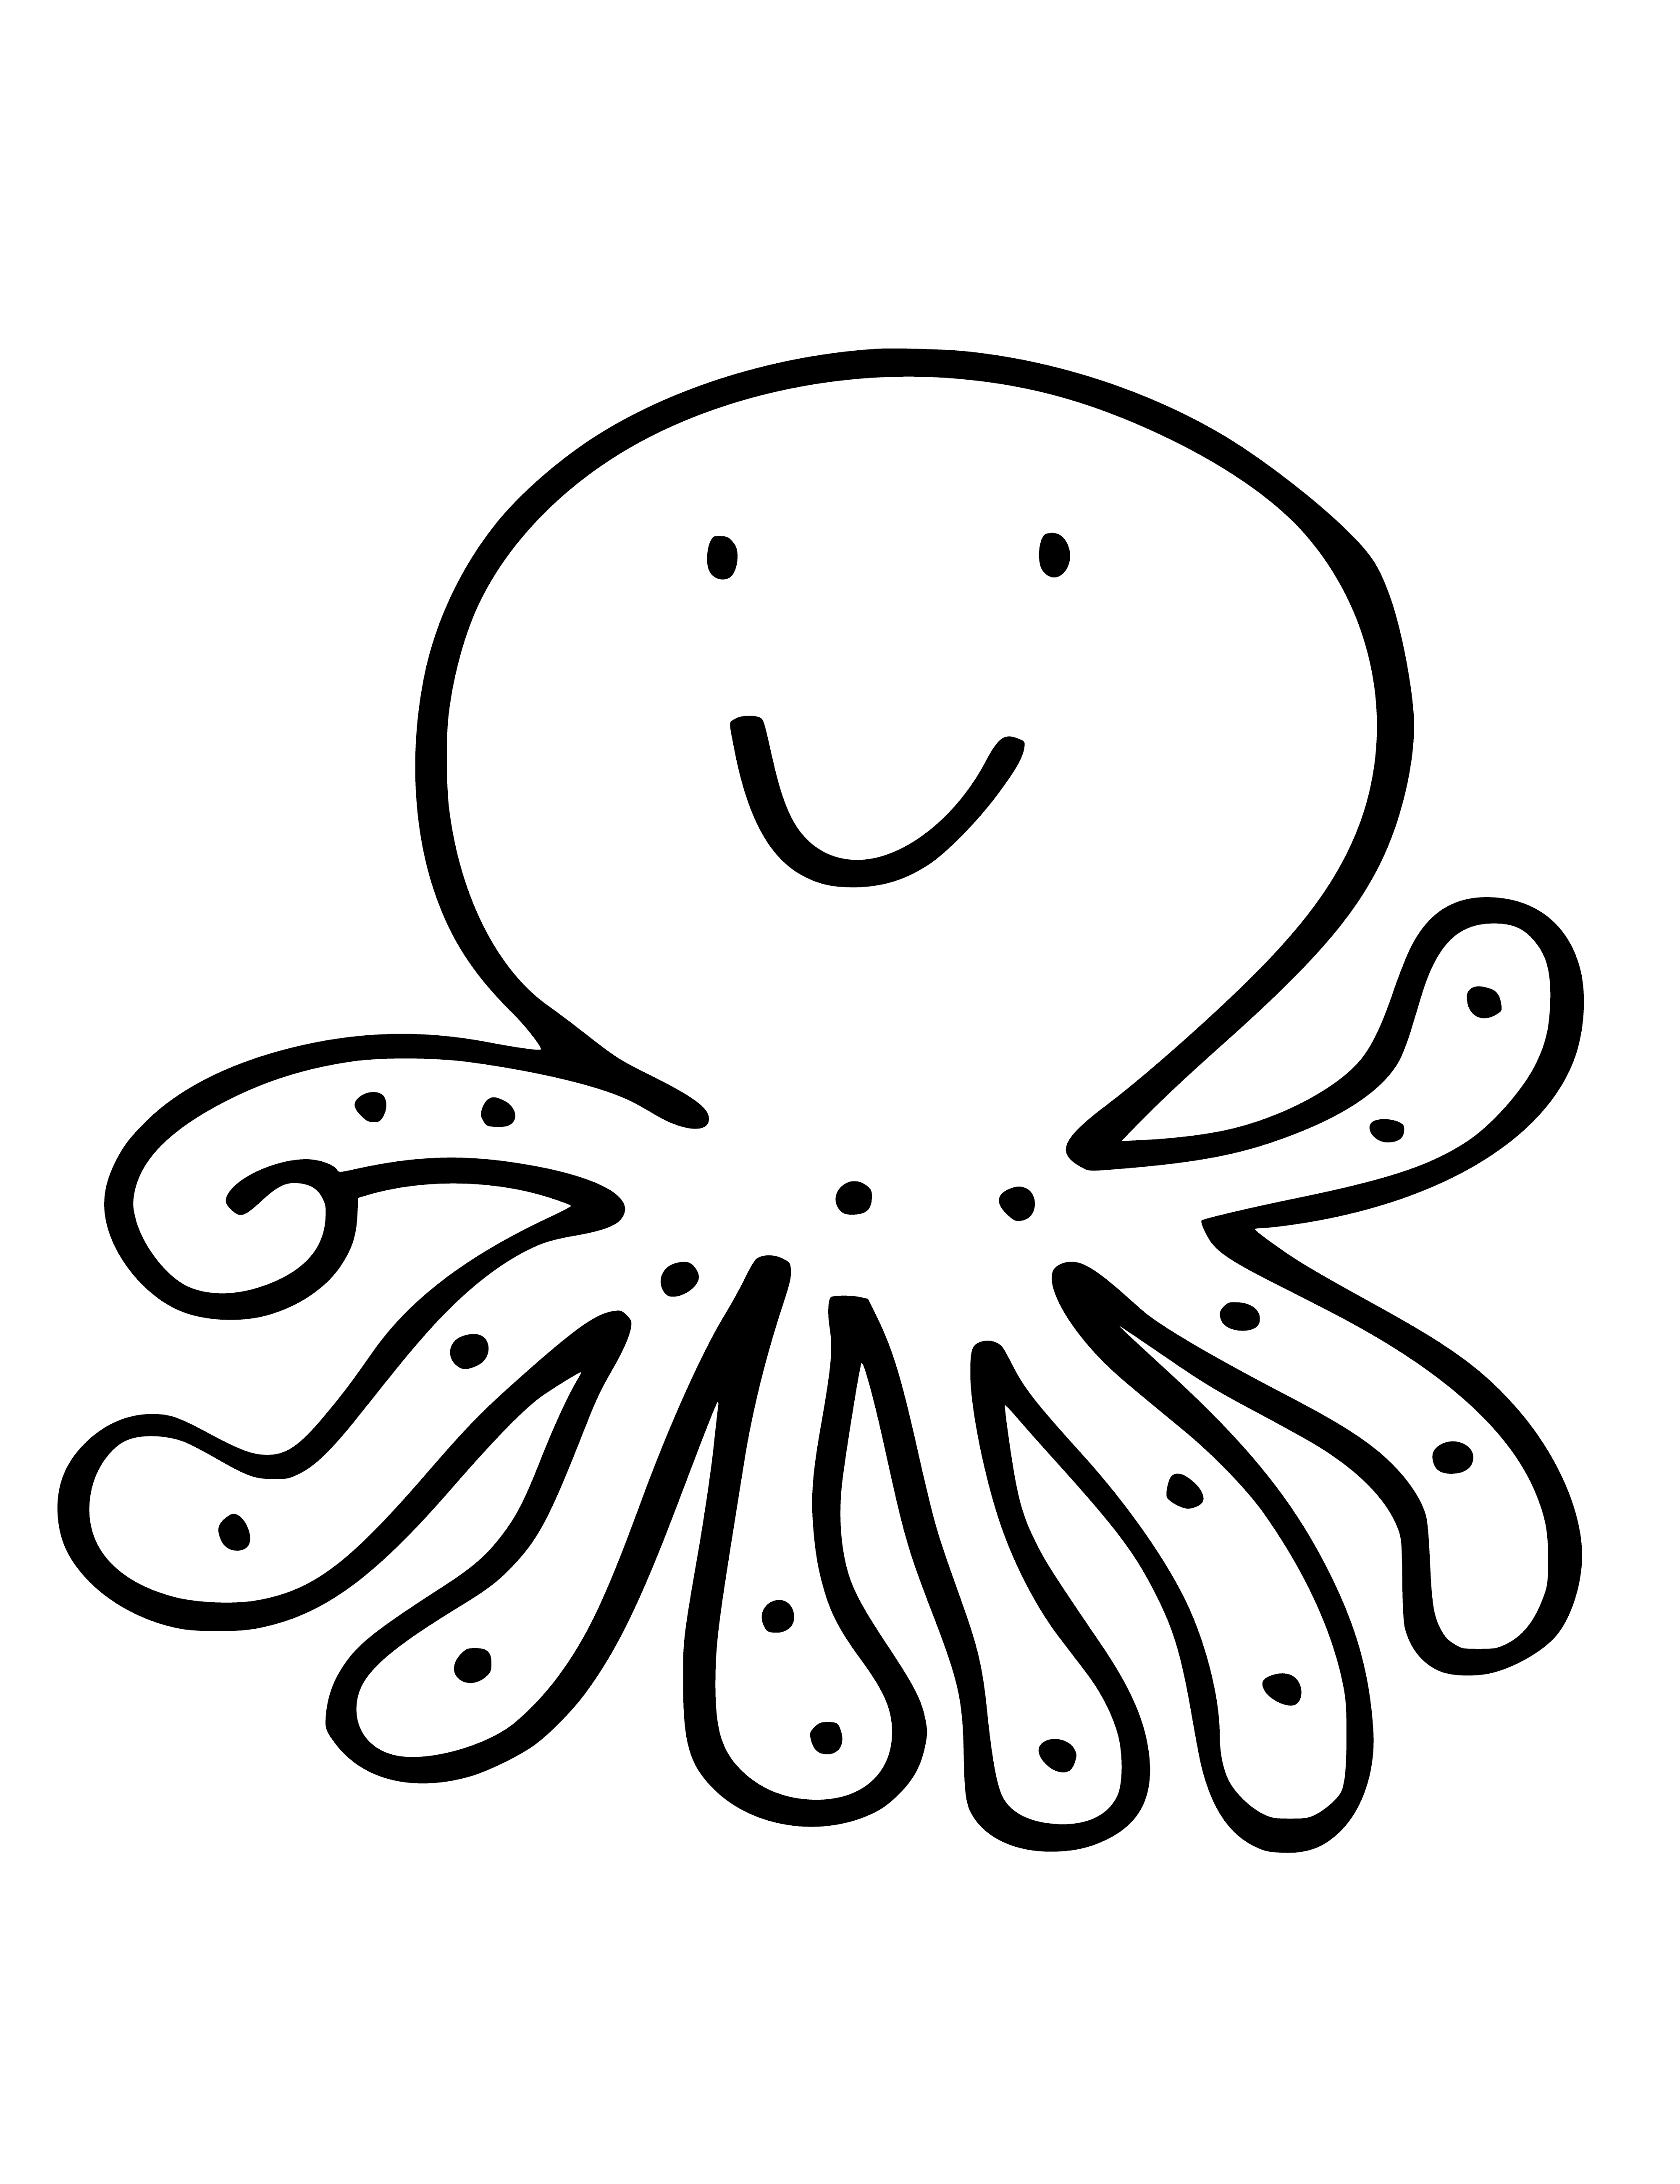 coloring page: An octopus with 8 long legs, round body/head, round black eyes, wide mouth, purple w/ white spots.